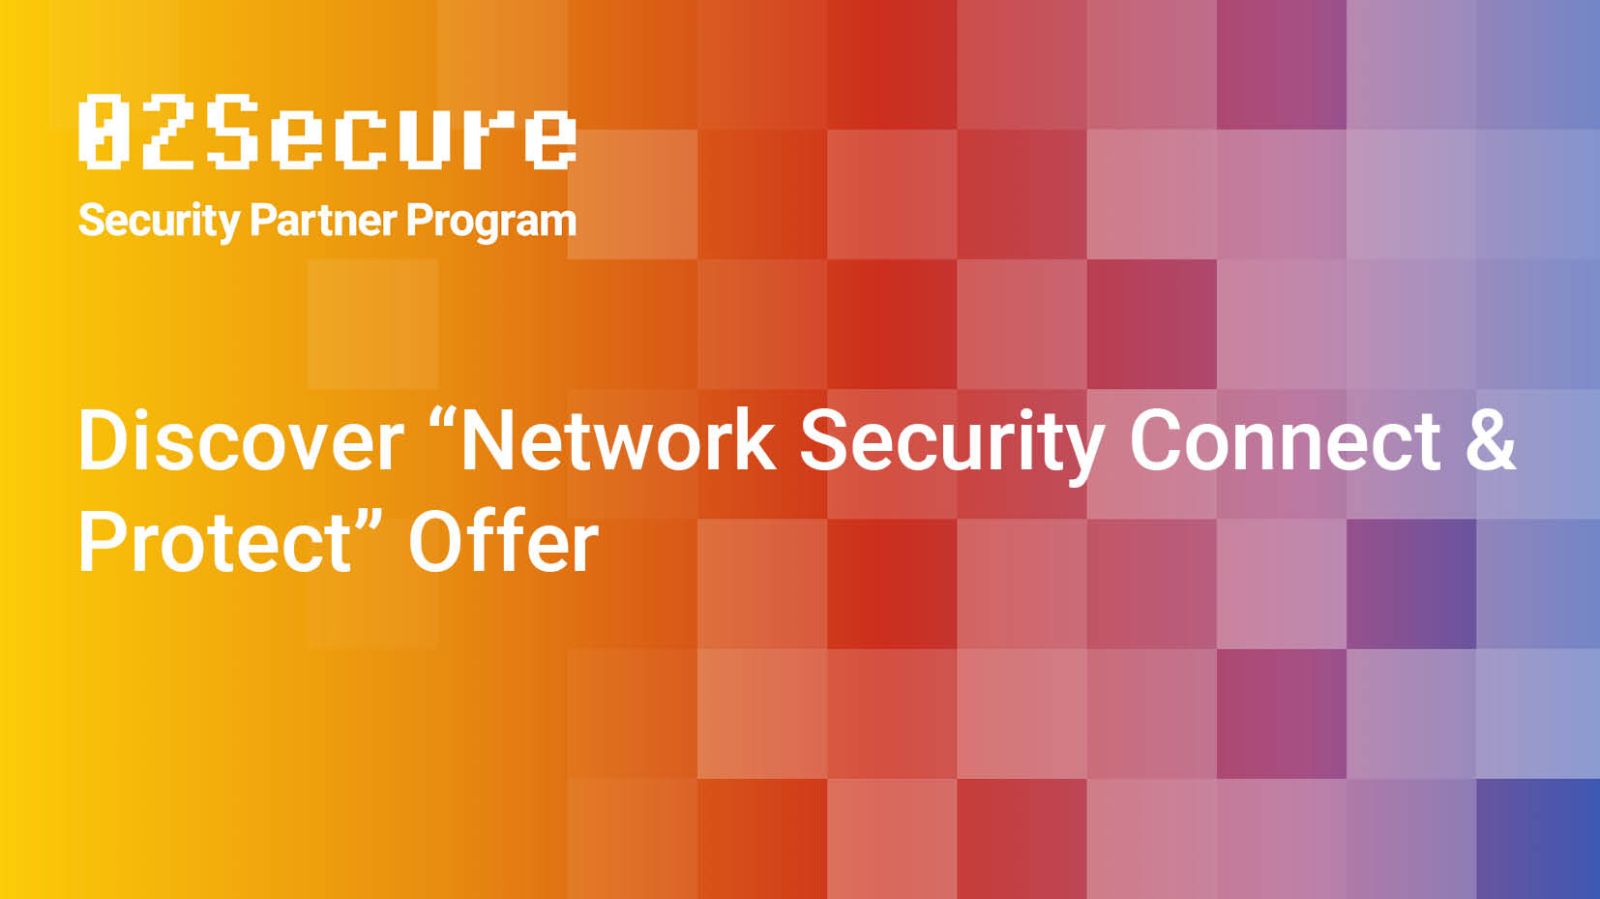 ON DEMAND - 02Secure Discover “Network Security Connect & Protect” Offer Featured Image